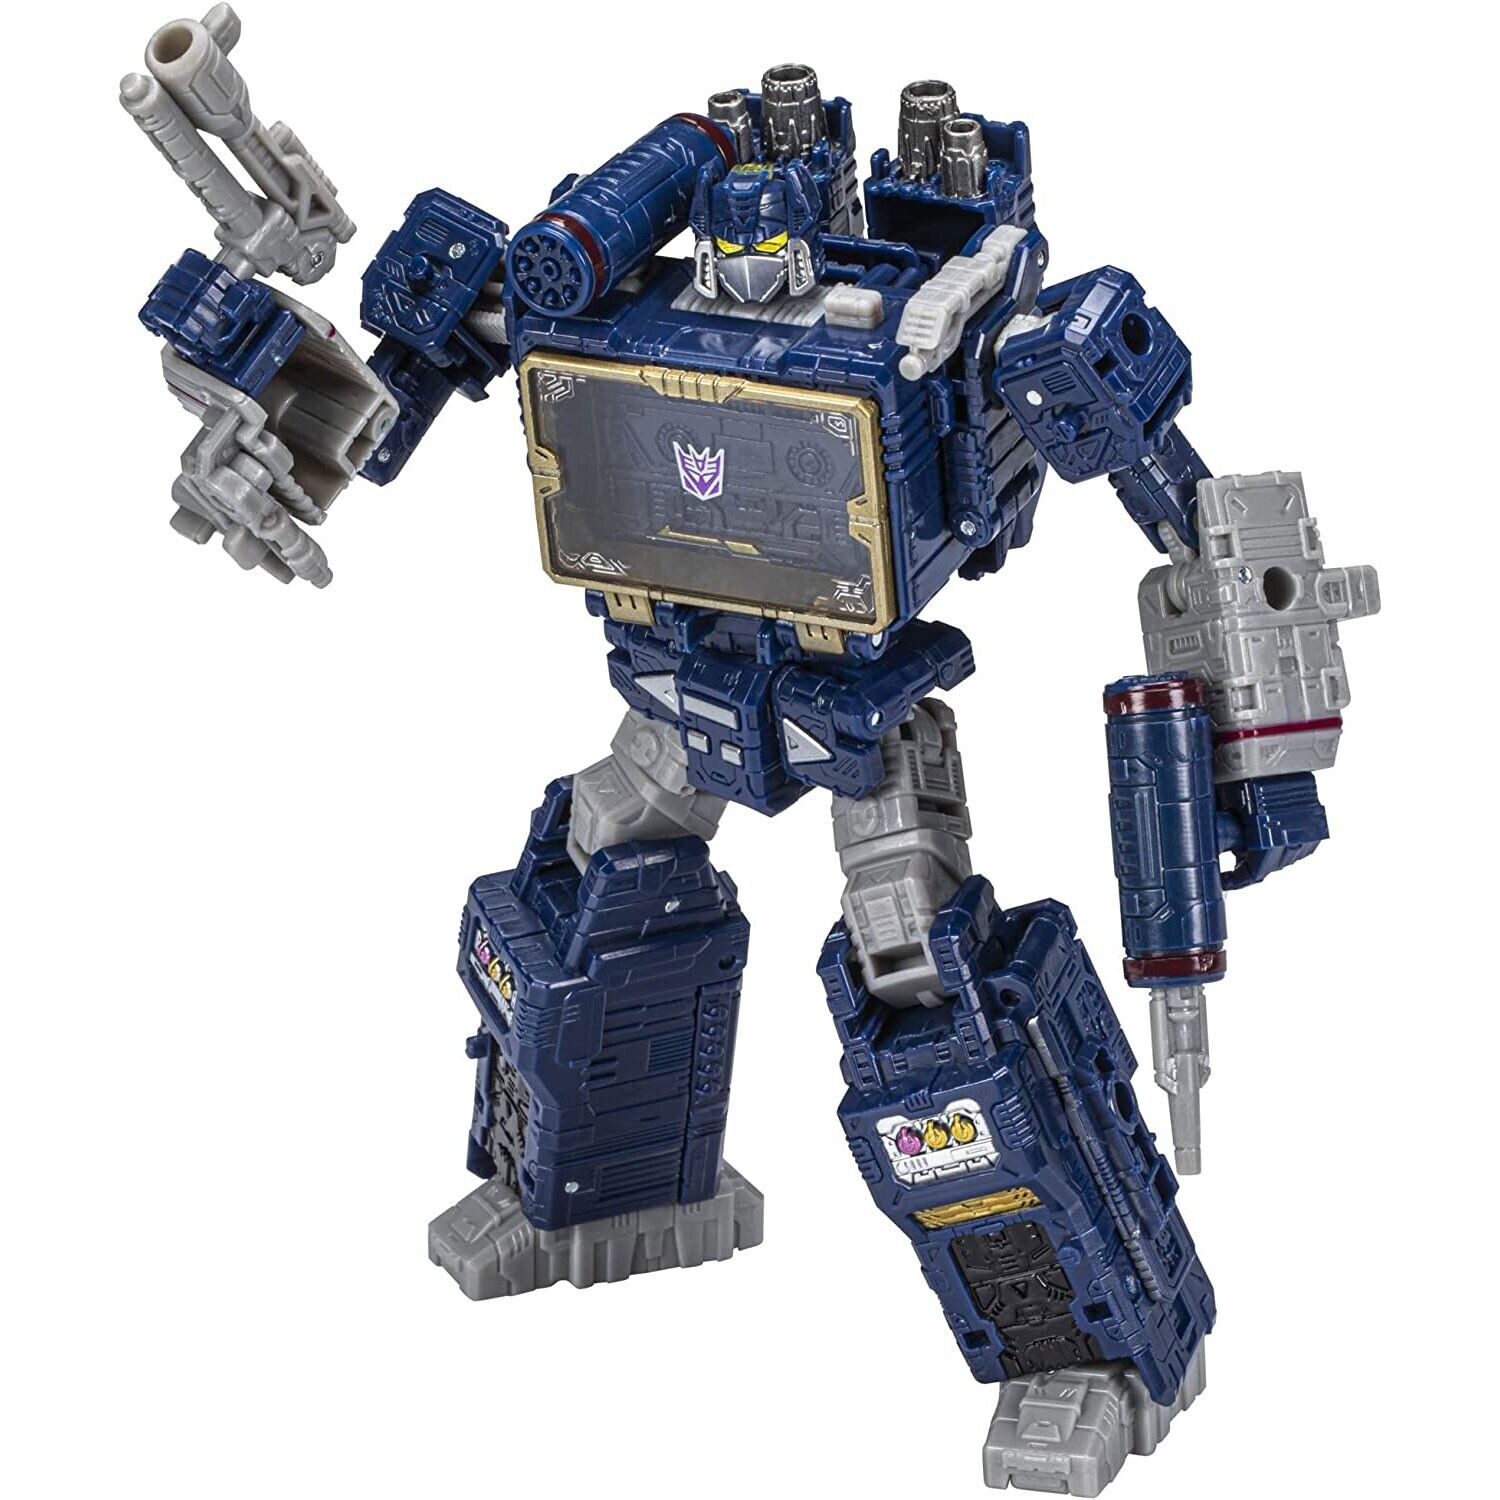 Transformers Legacy Voyager Soundwave Action Figure - New in Box